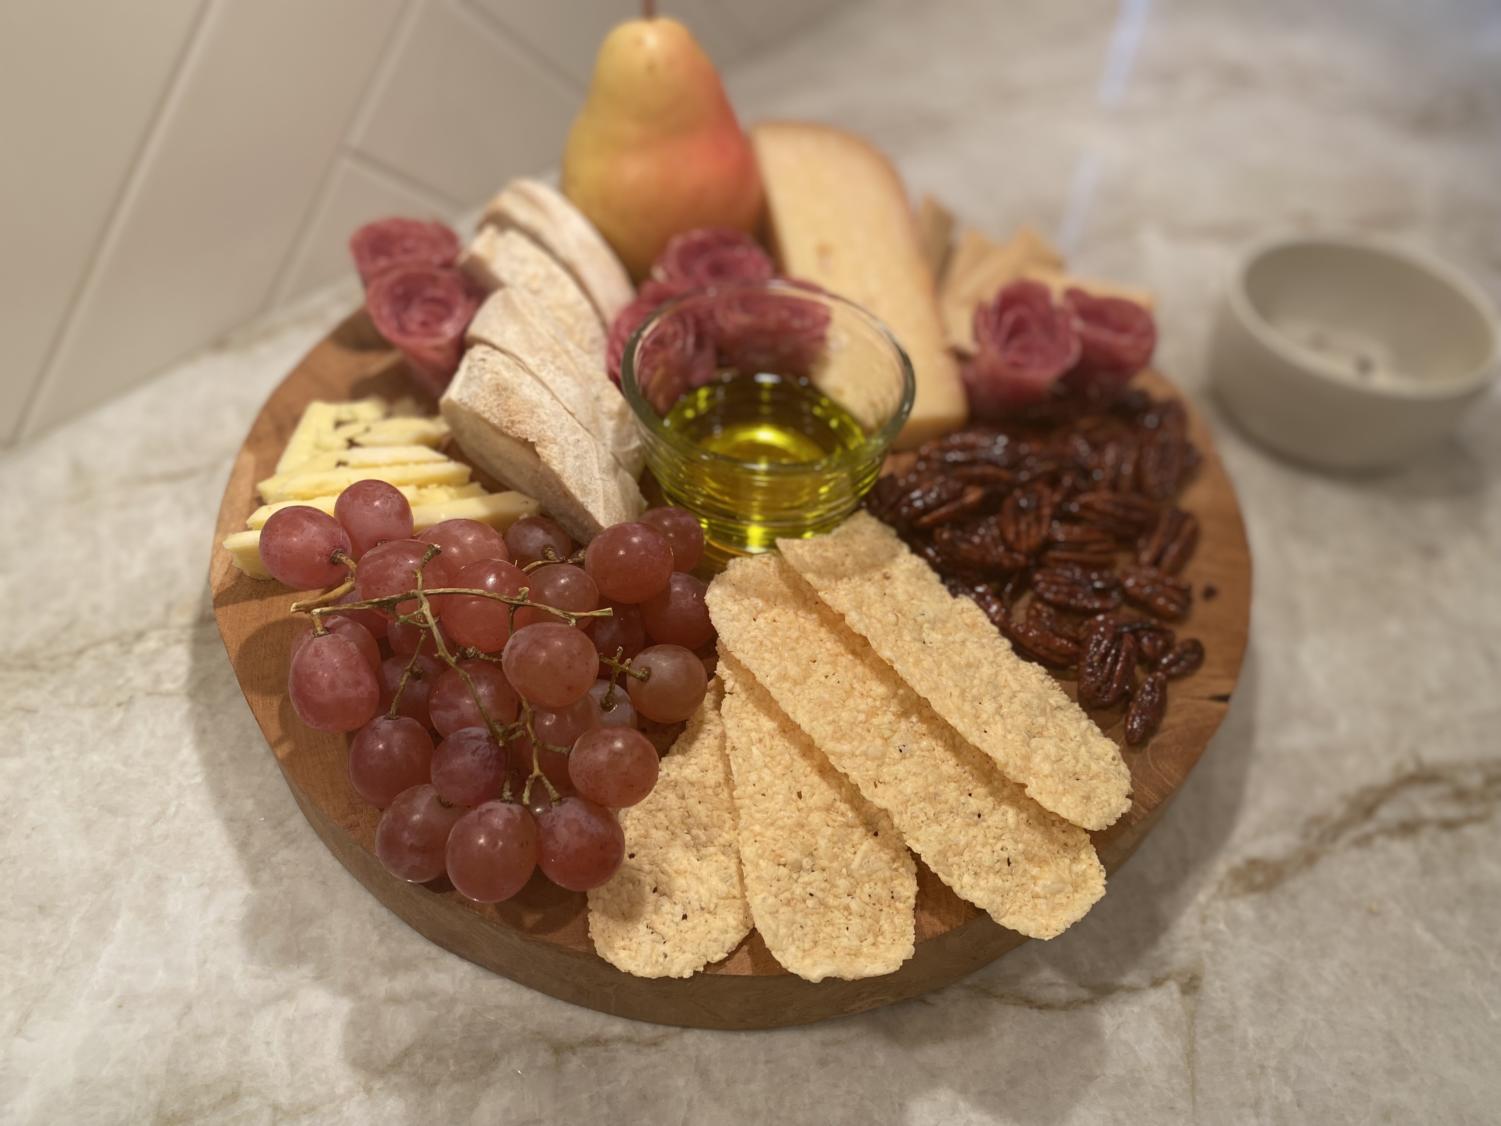 Charcuterie boards delight guests pre-meal